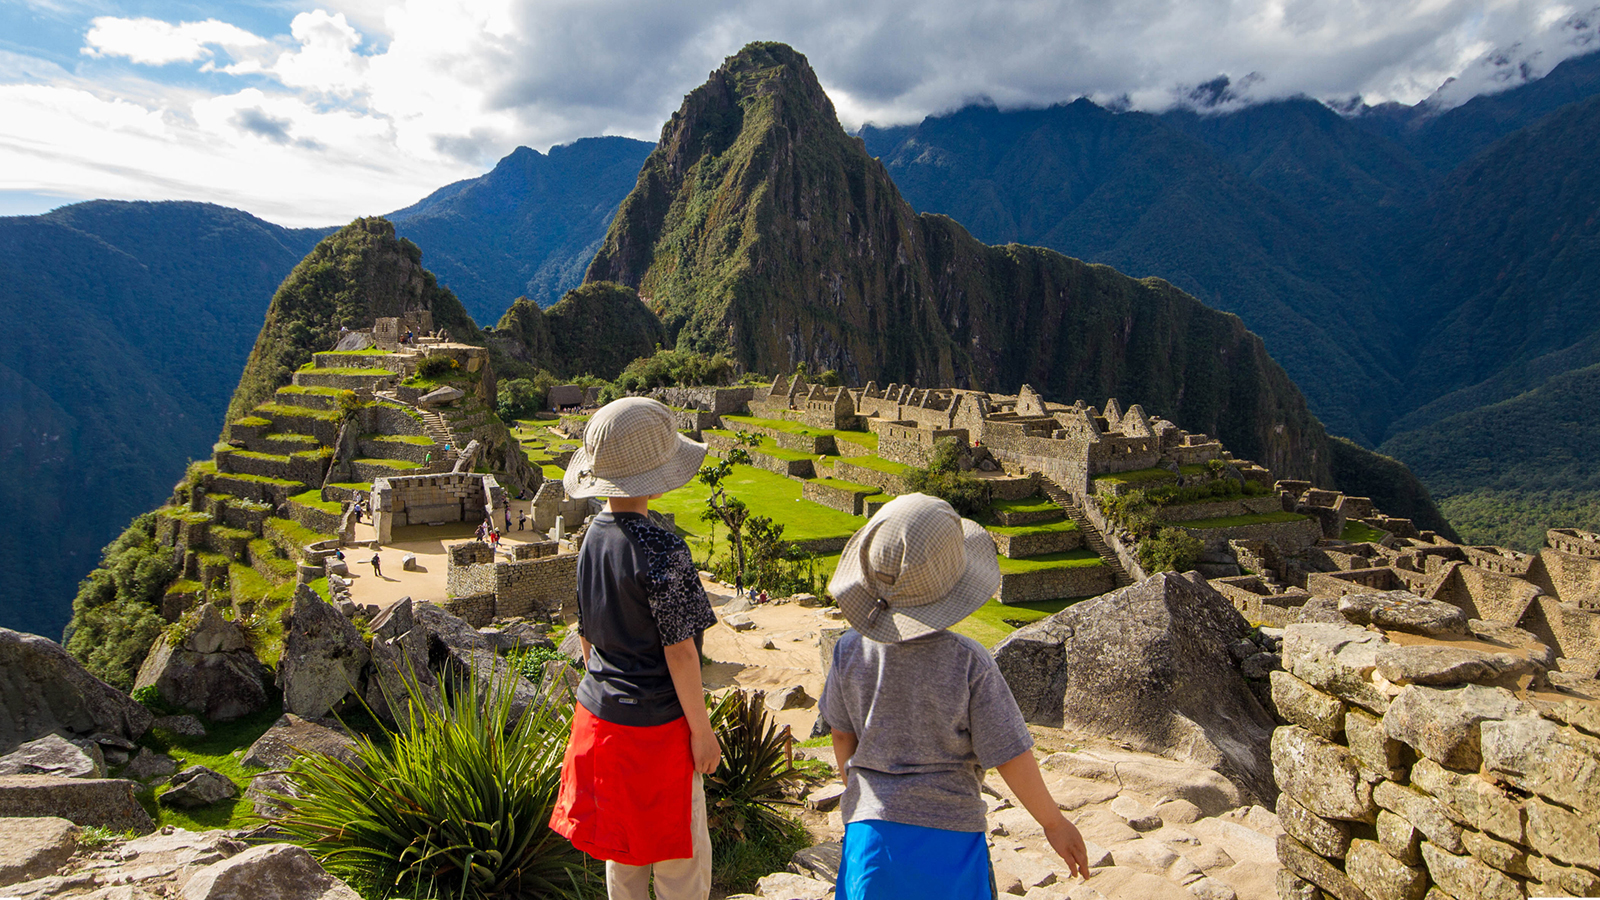 When on a family adventure travel to Peru visiting Machu Picchu with kids is a must do activity.